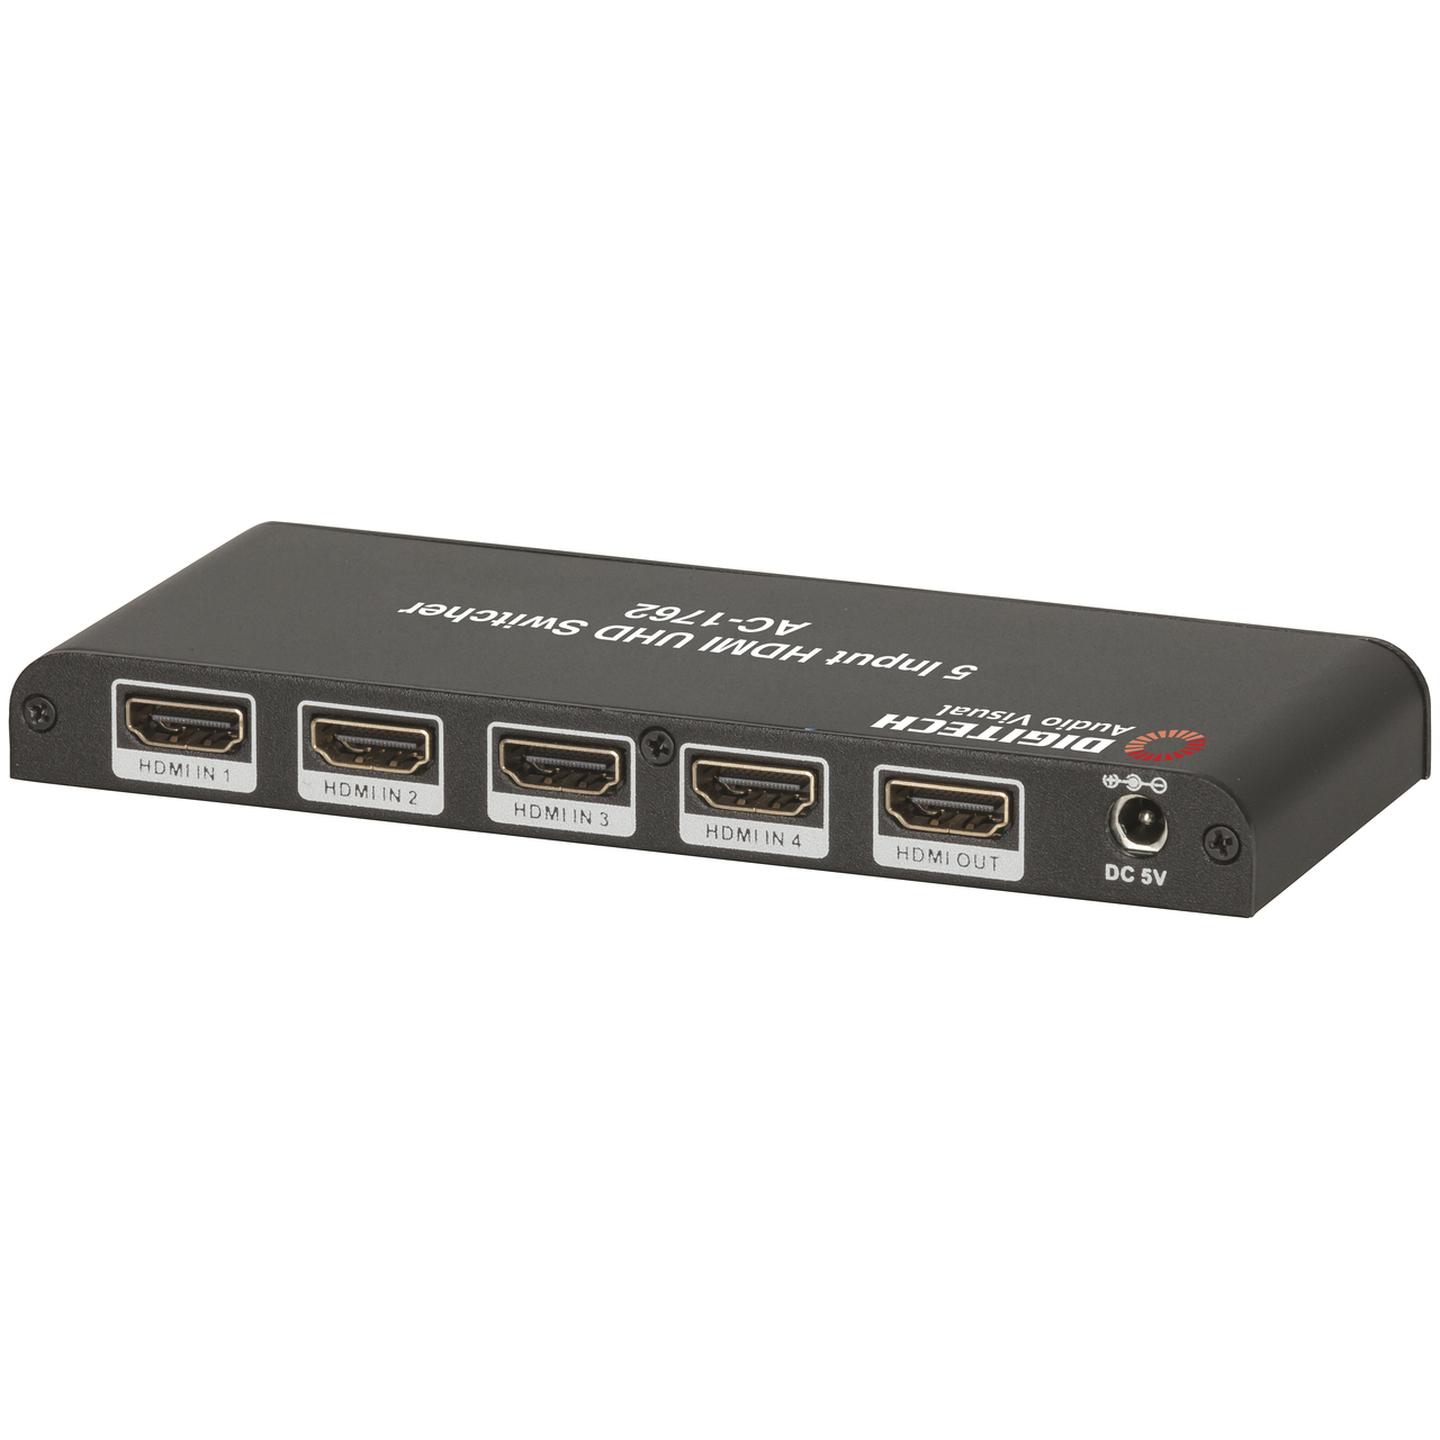 5 Way HDMI 2.0 Switcher with Remote 